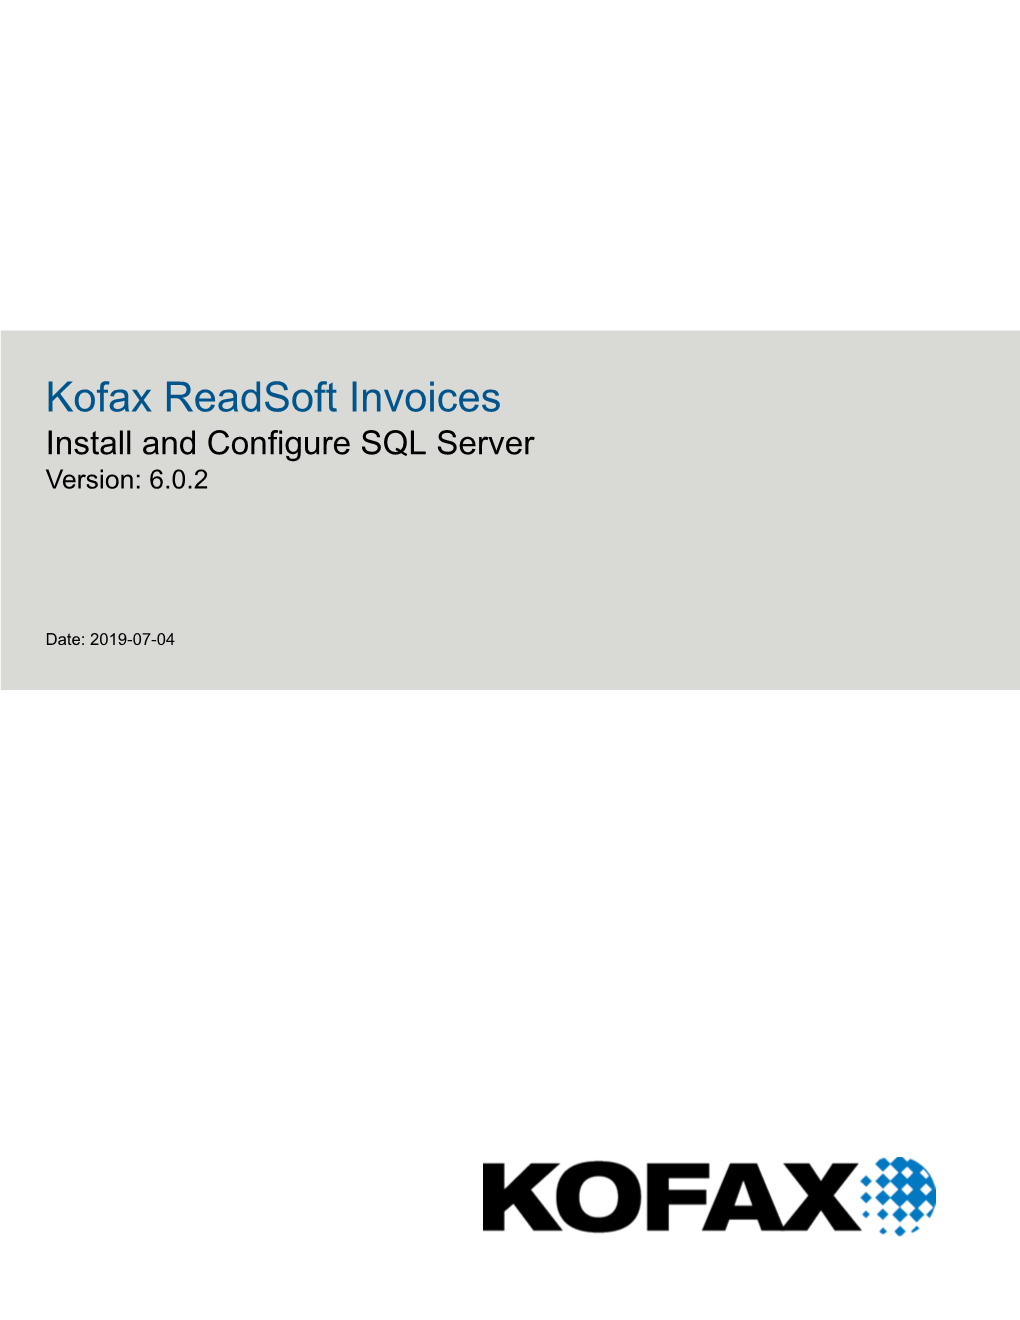 Kofax Readsoft Invoices Install and Configure SQL Server Version: 6.0.2